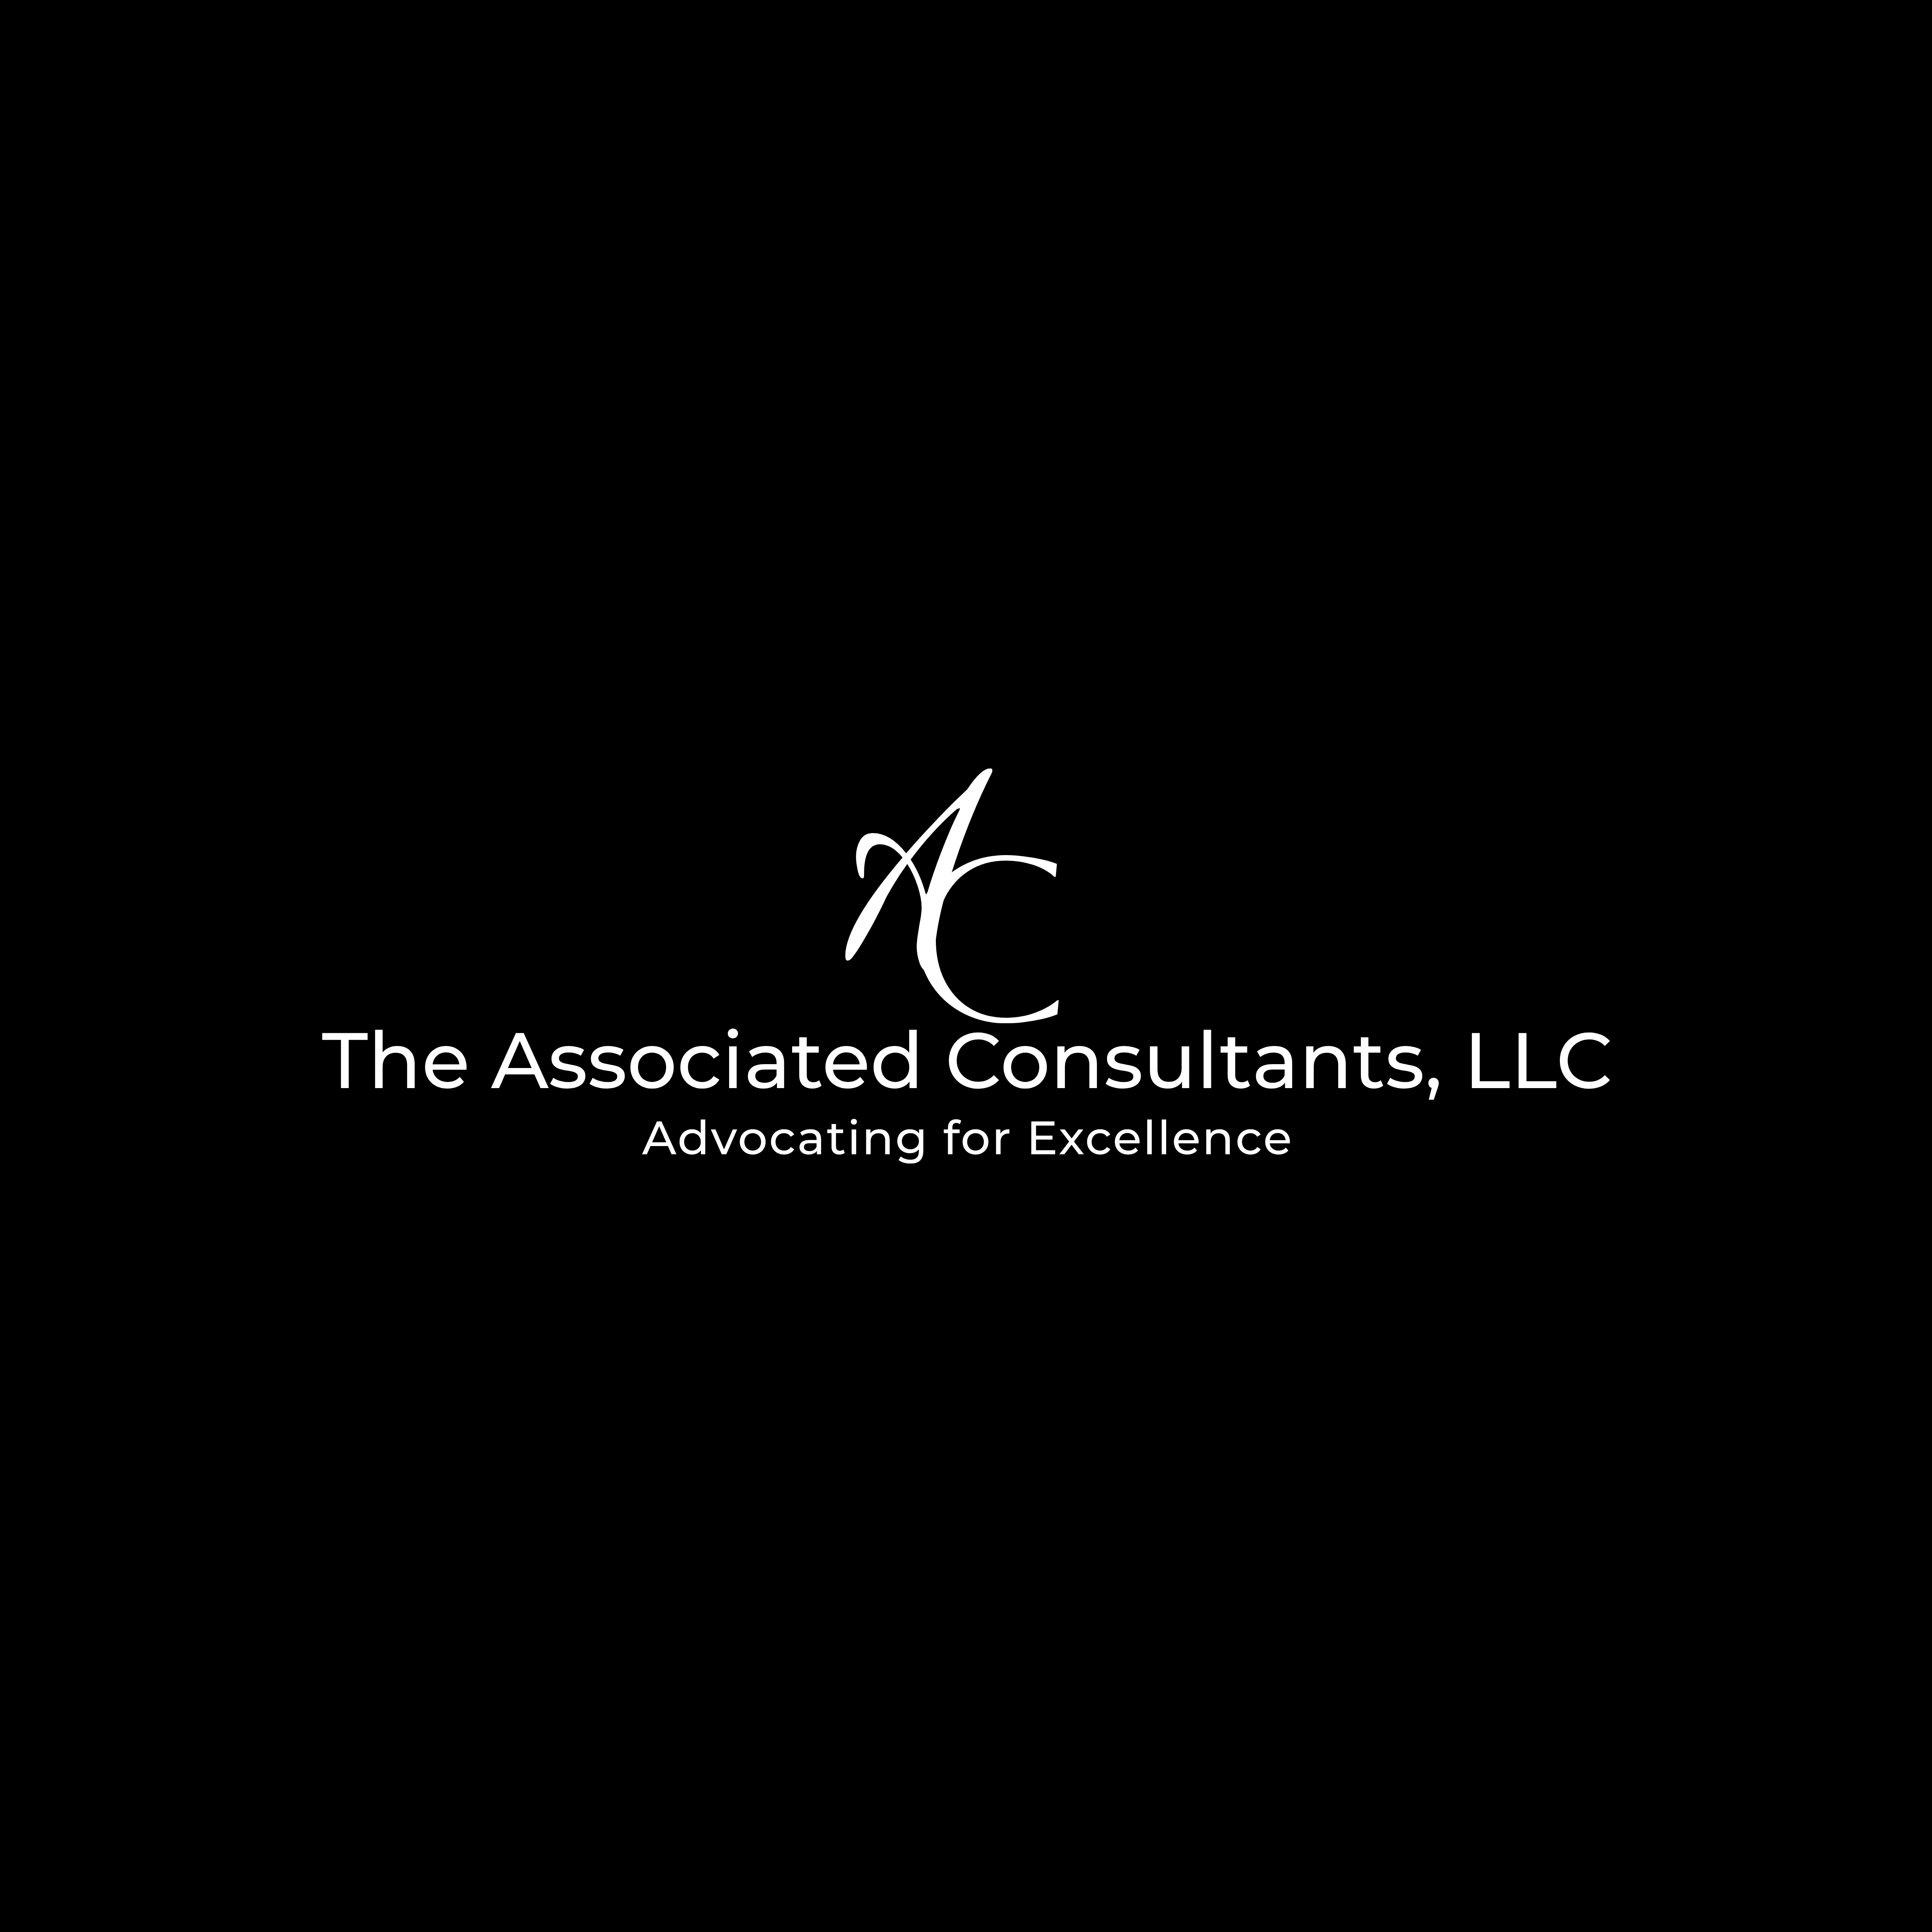 The Associated Consultants, LLC